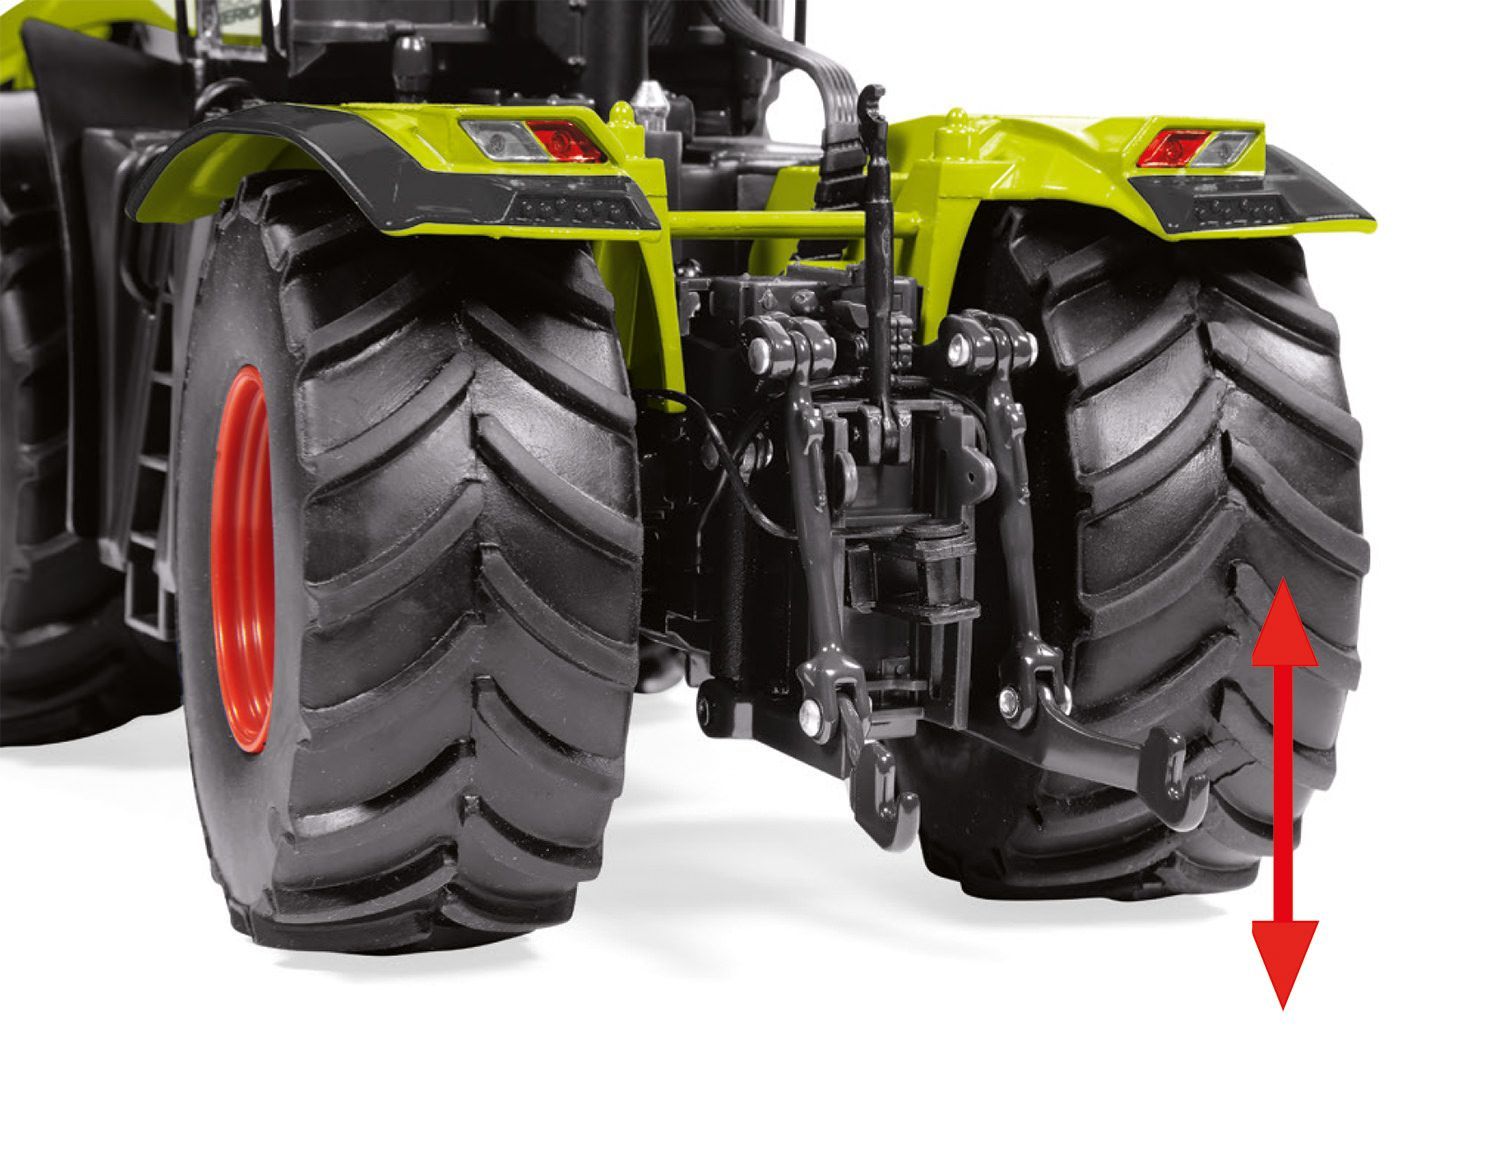 Wiking 077853 - Claas Xerion 4500 1:32